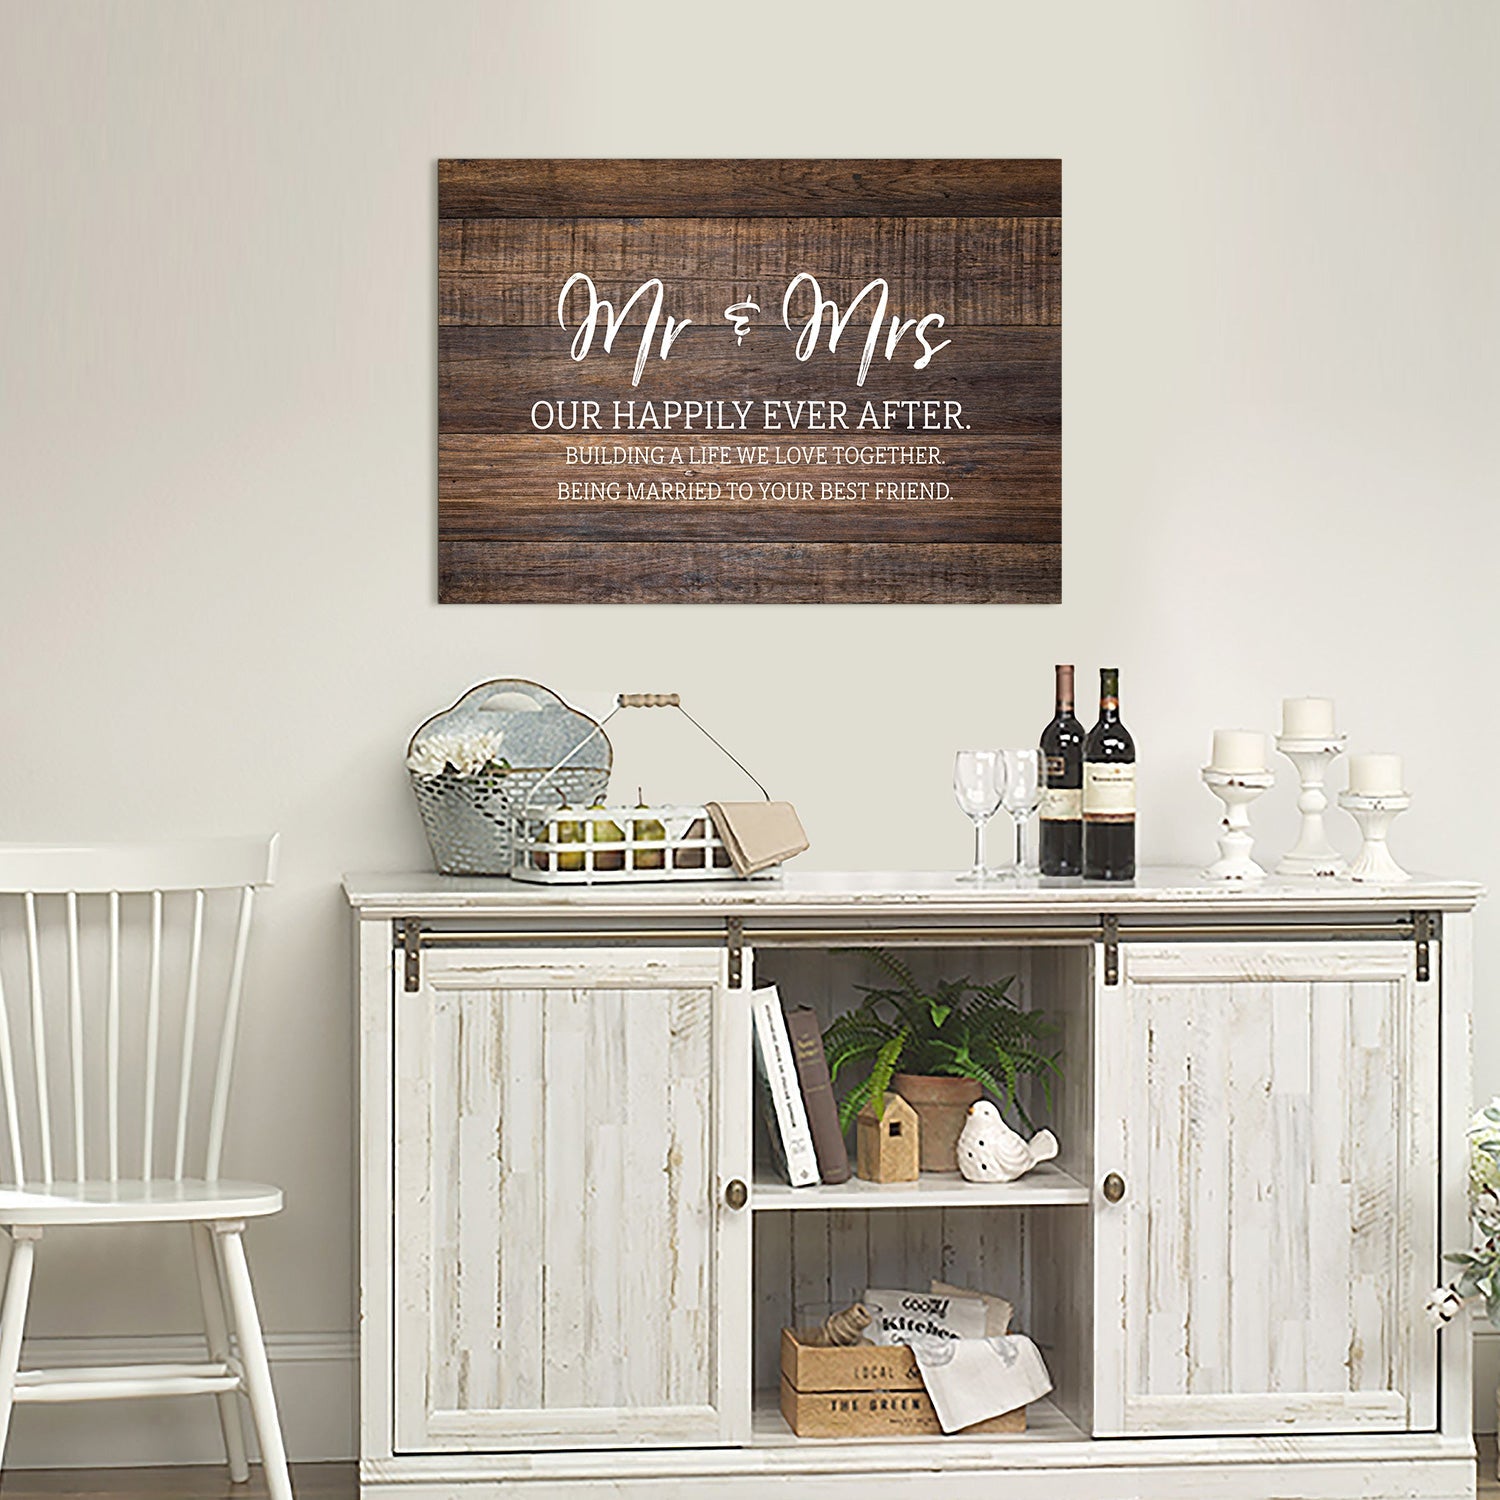 Mr and Mrs Husband and Wife Canvas Wall Art Framed Modern Wall Decor Decorative Accents For Walls Ready to Hang for Home Living Room Bedroom Entryway Kitchen Office Size 24”x16” - LifeSong Milestones